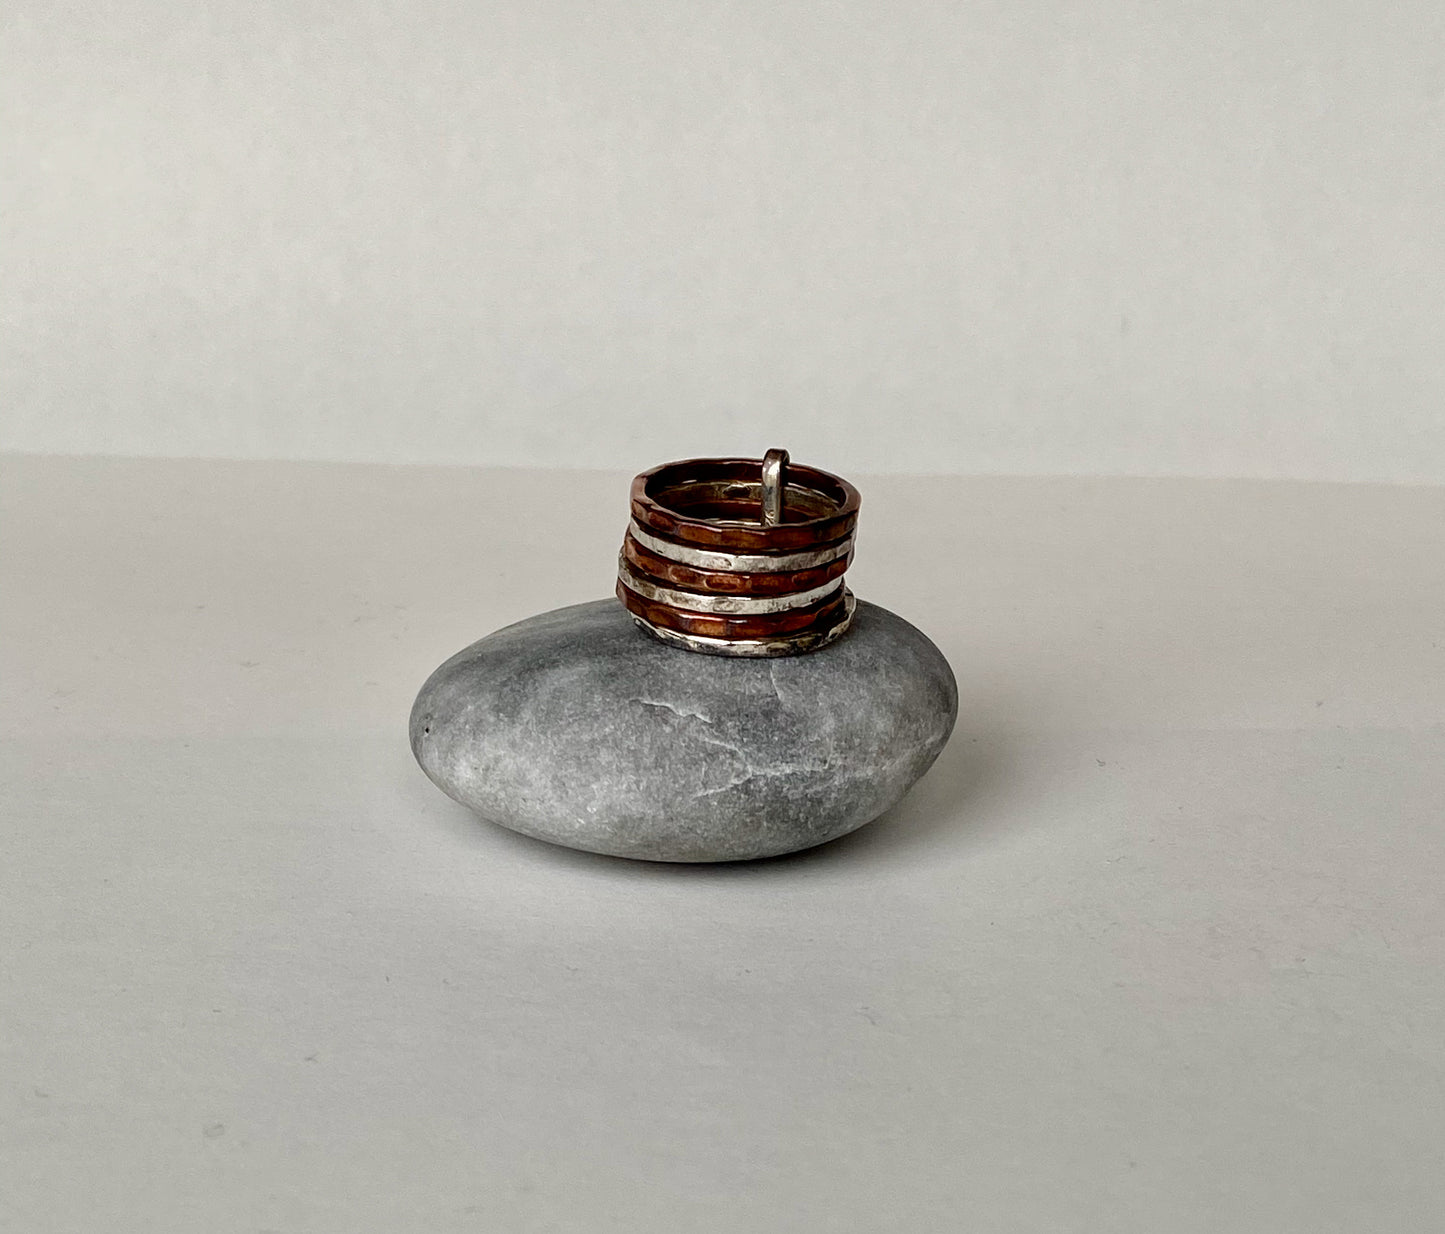 Handmade size 5.5 sterling silver, and copper spinning ring.